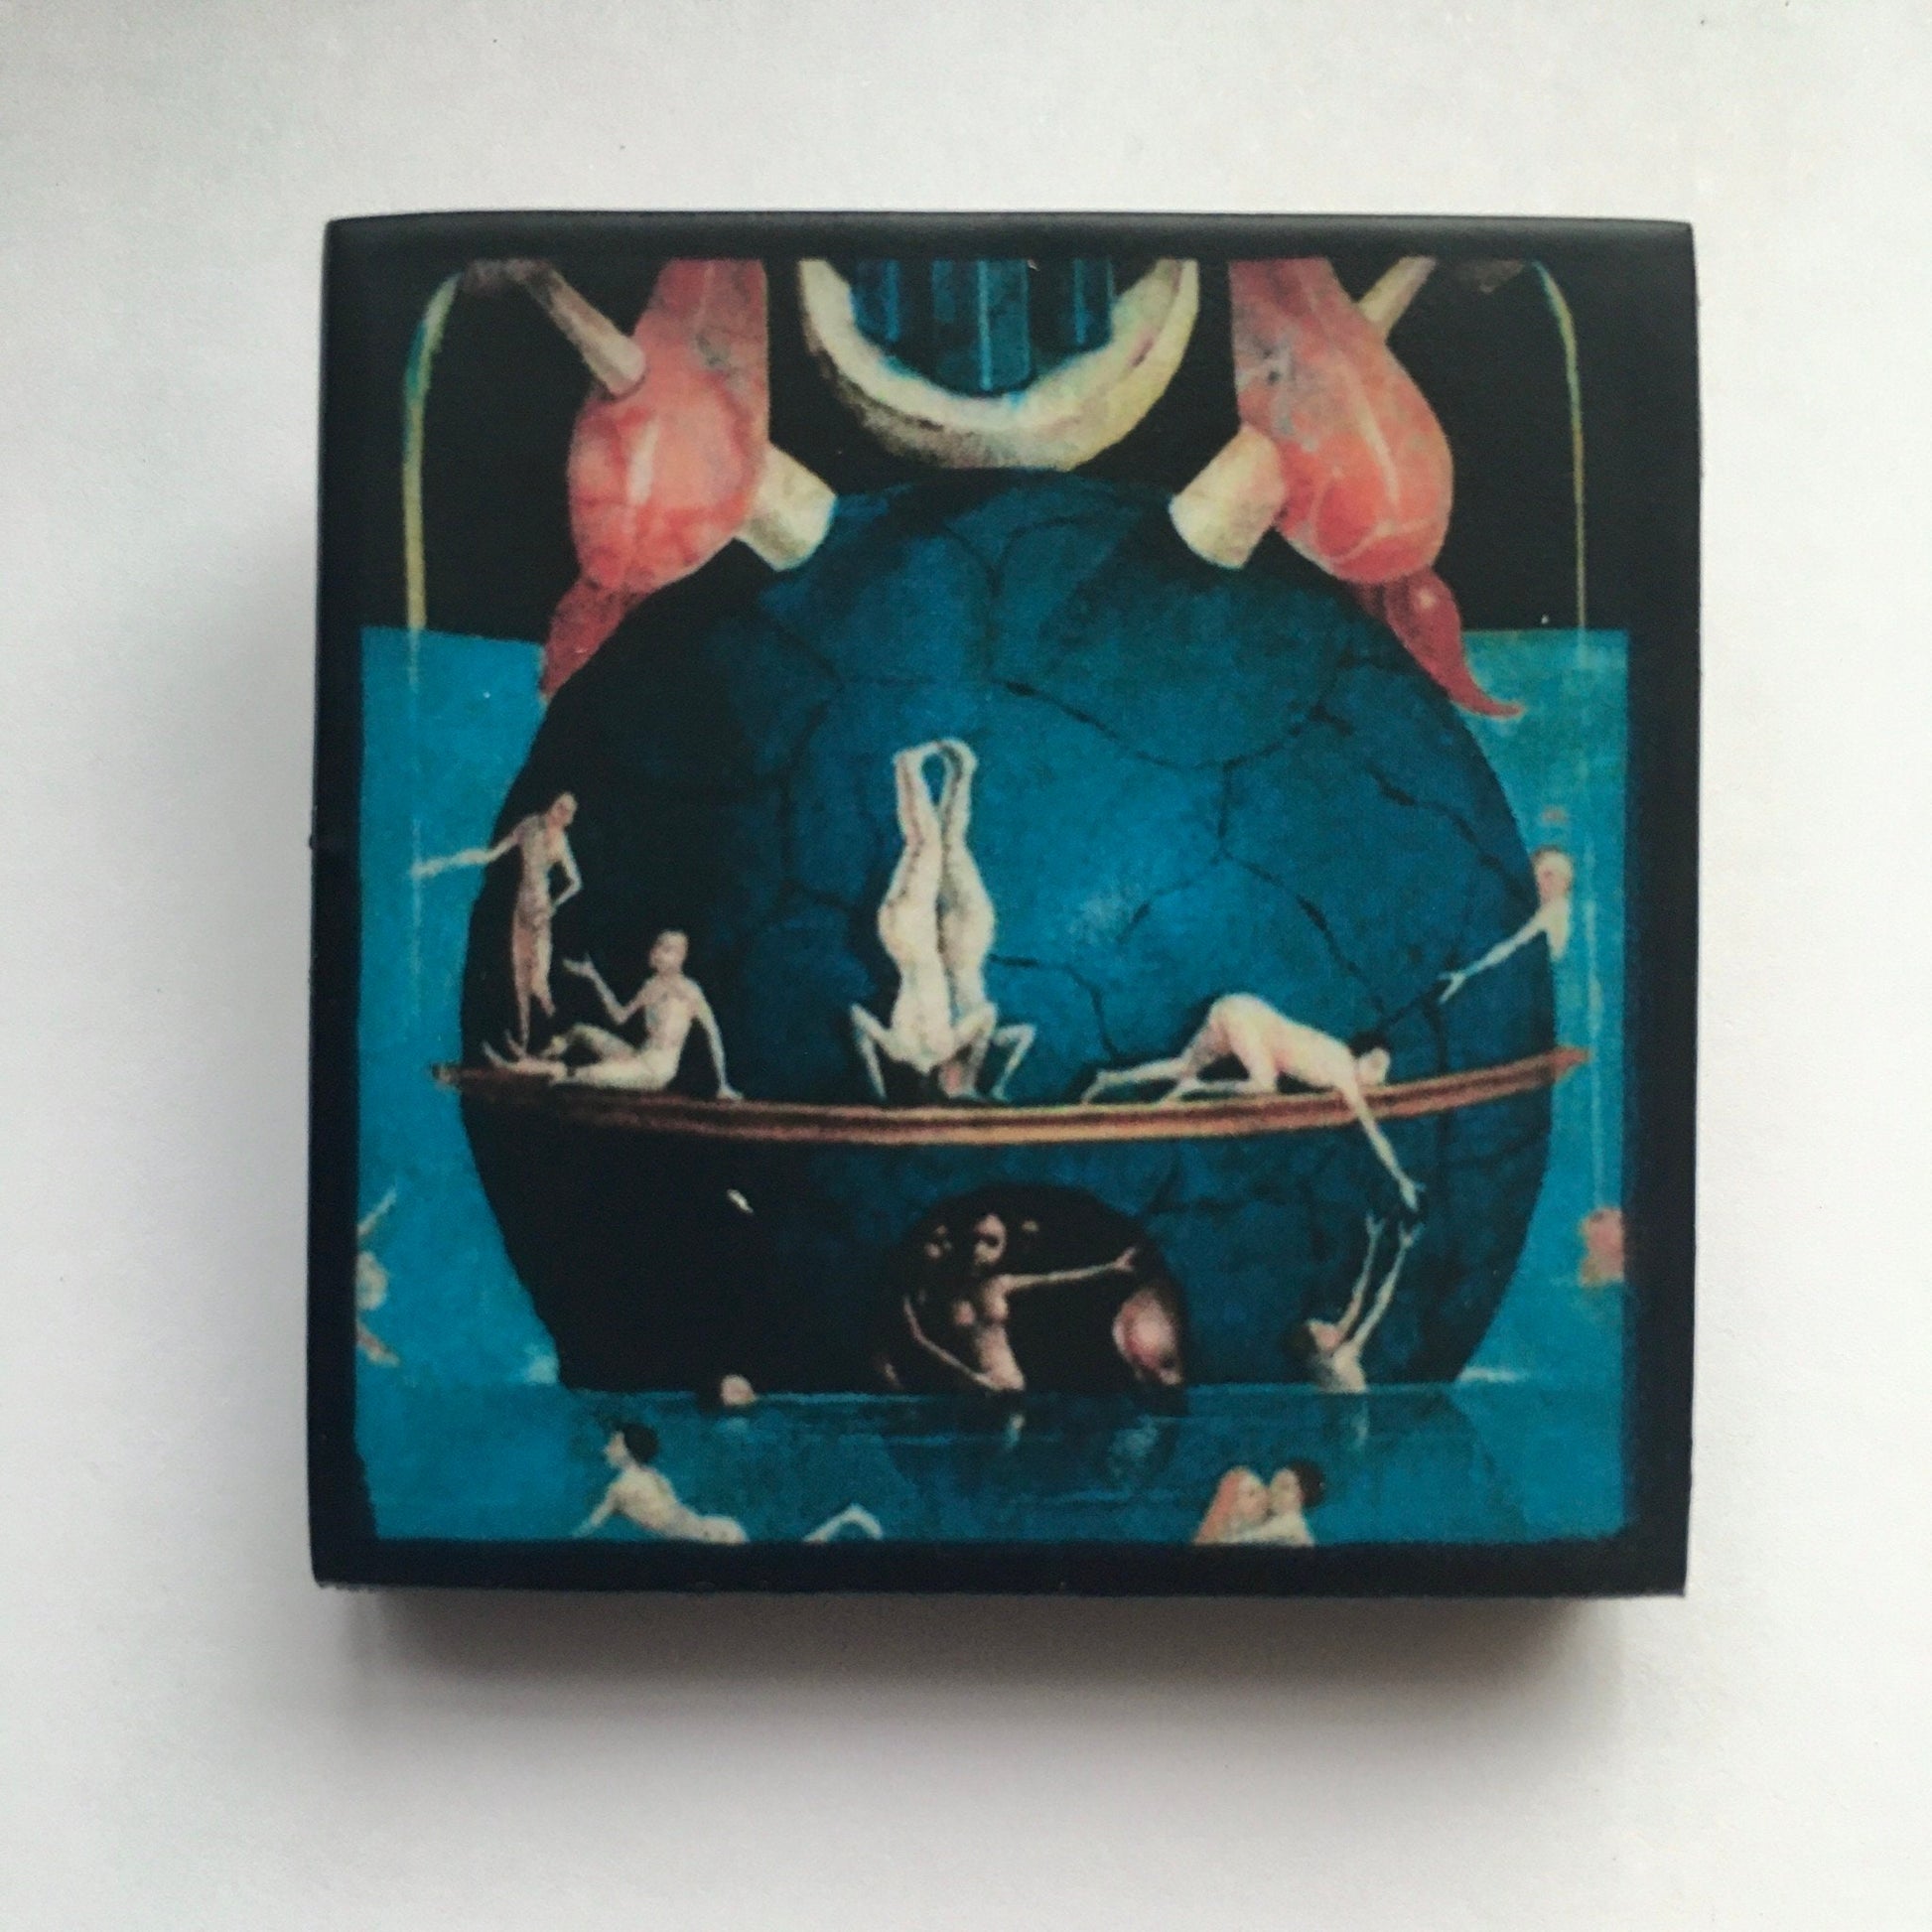 Unisex wooden 4, 3 cm squared brooch, inspired by Hieronymus Bosch painting "The Garden of Earthly Delights".